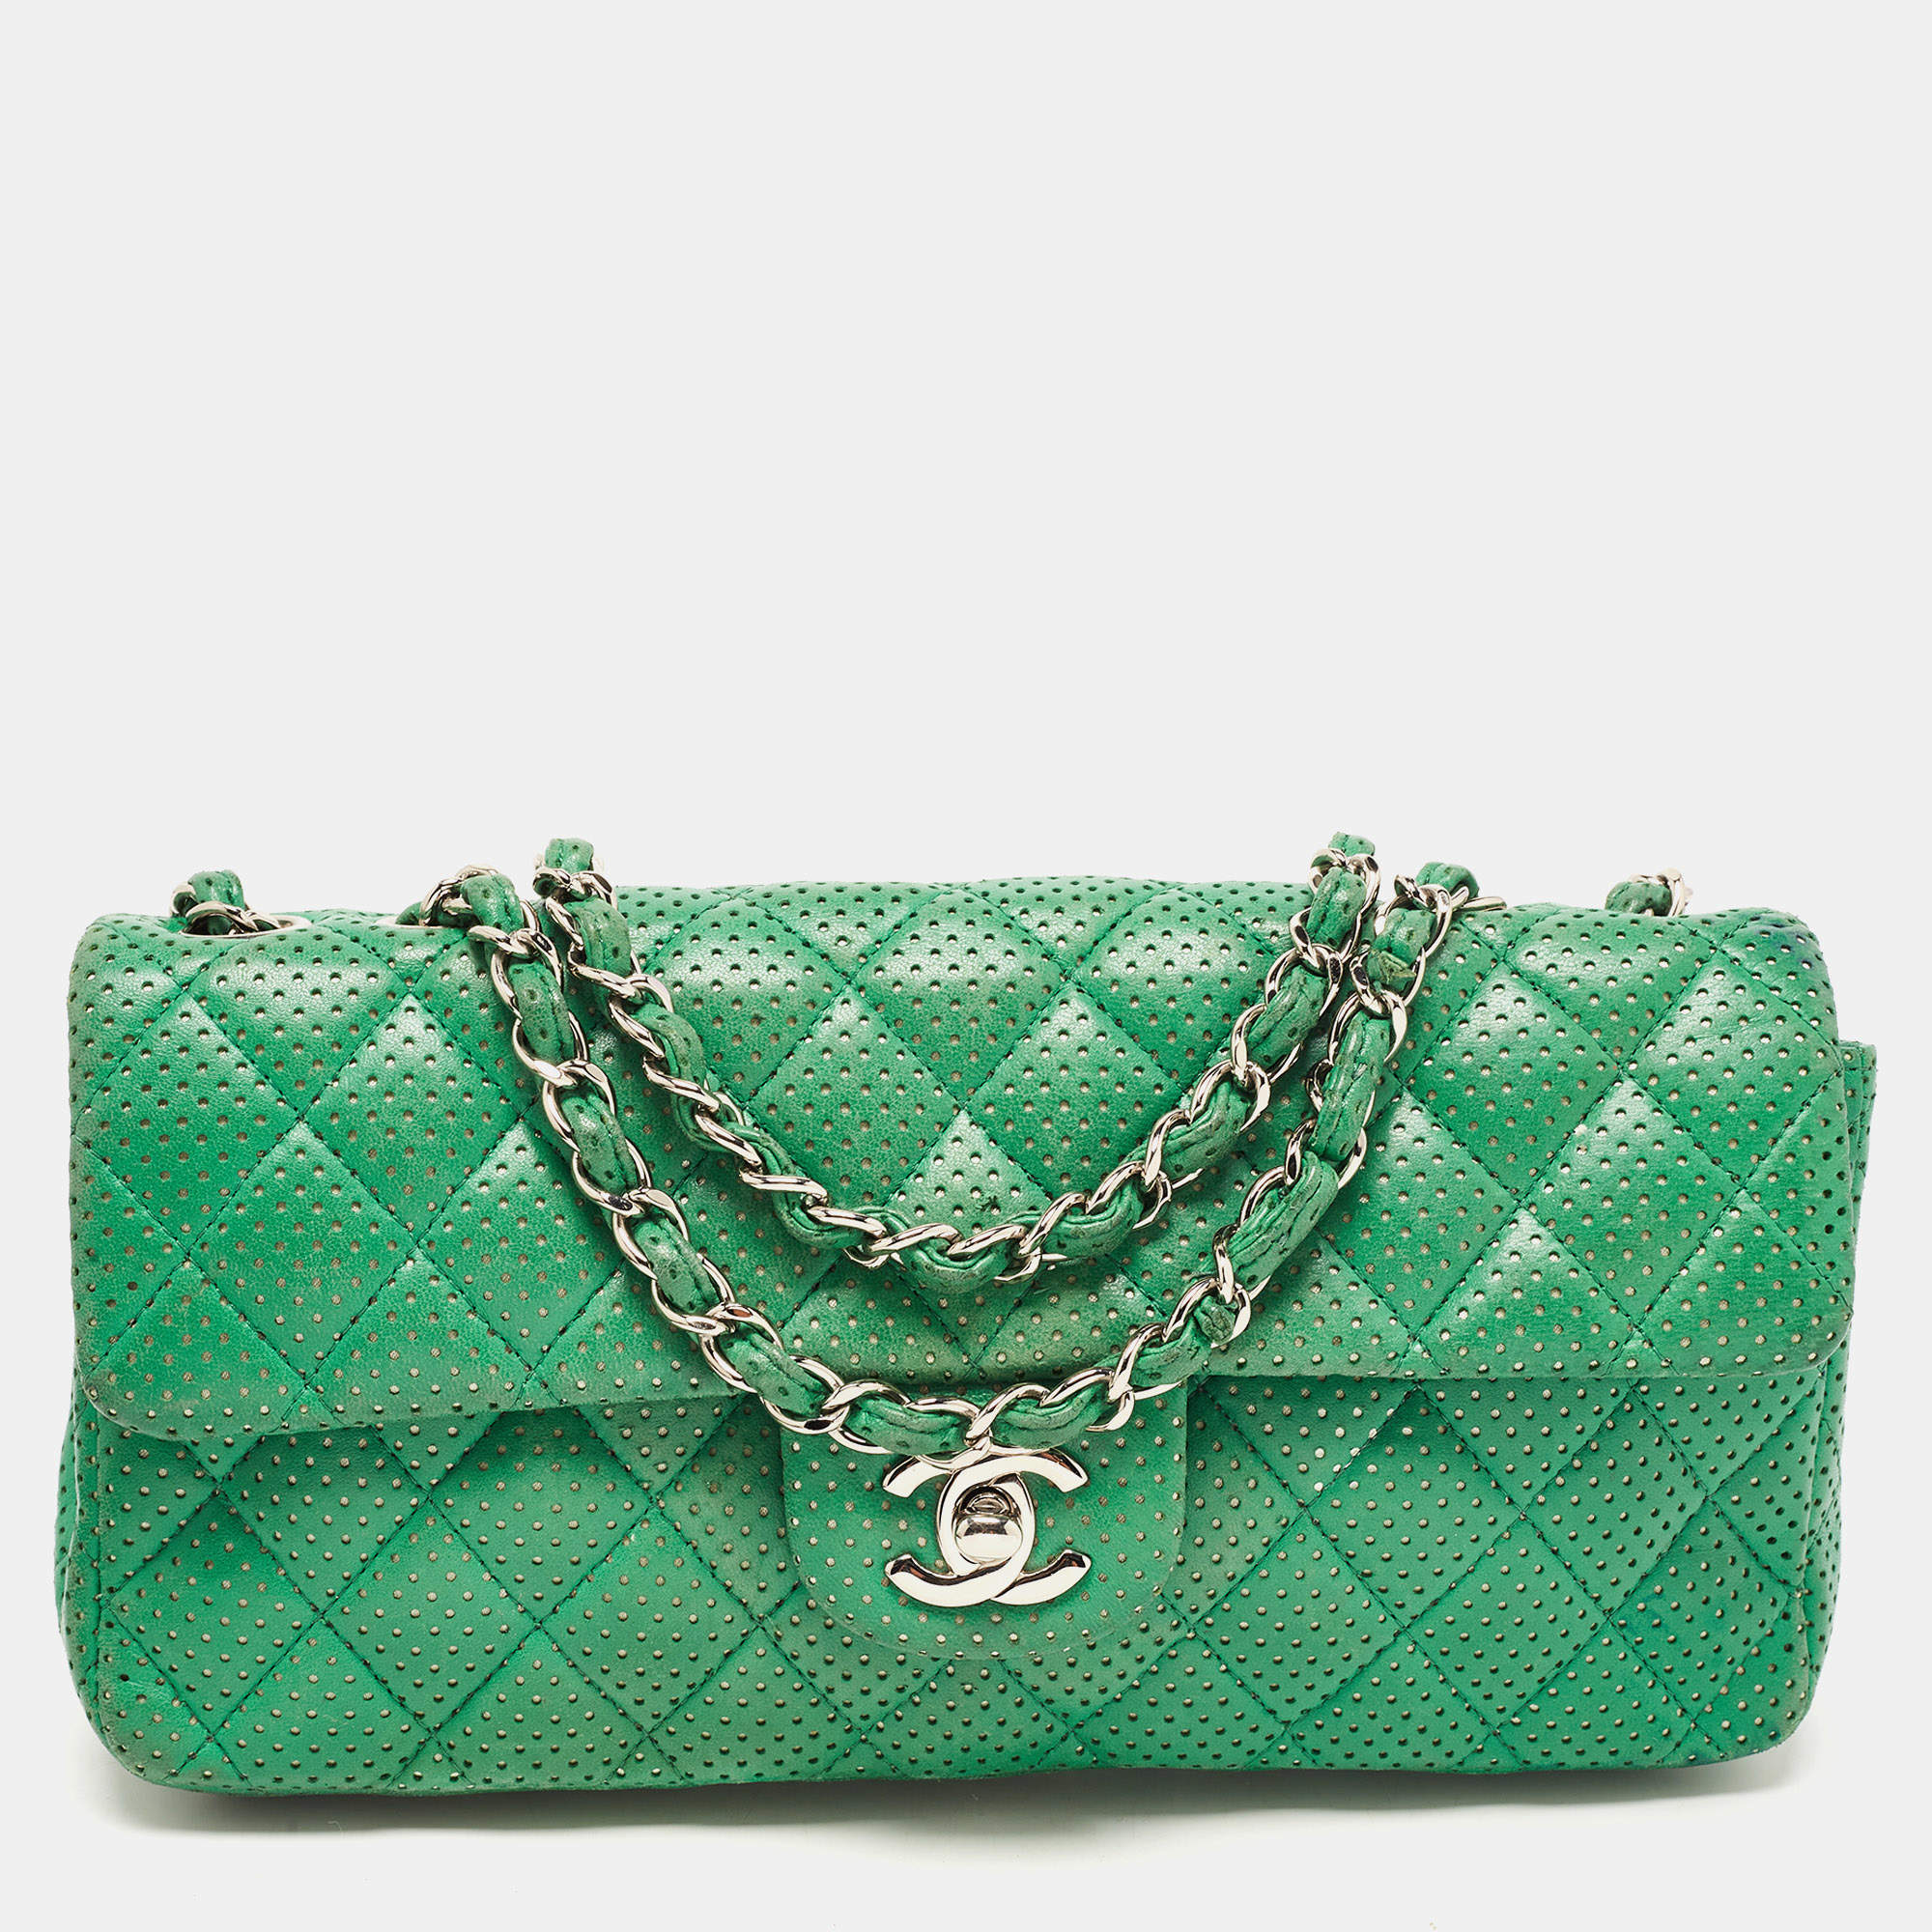 Chanel Green Quilted Perforated Leather East/West Classic Flap Bag